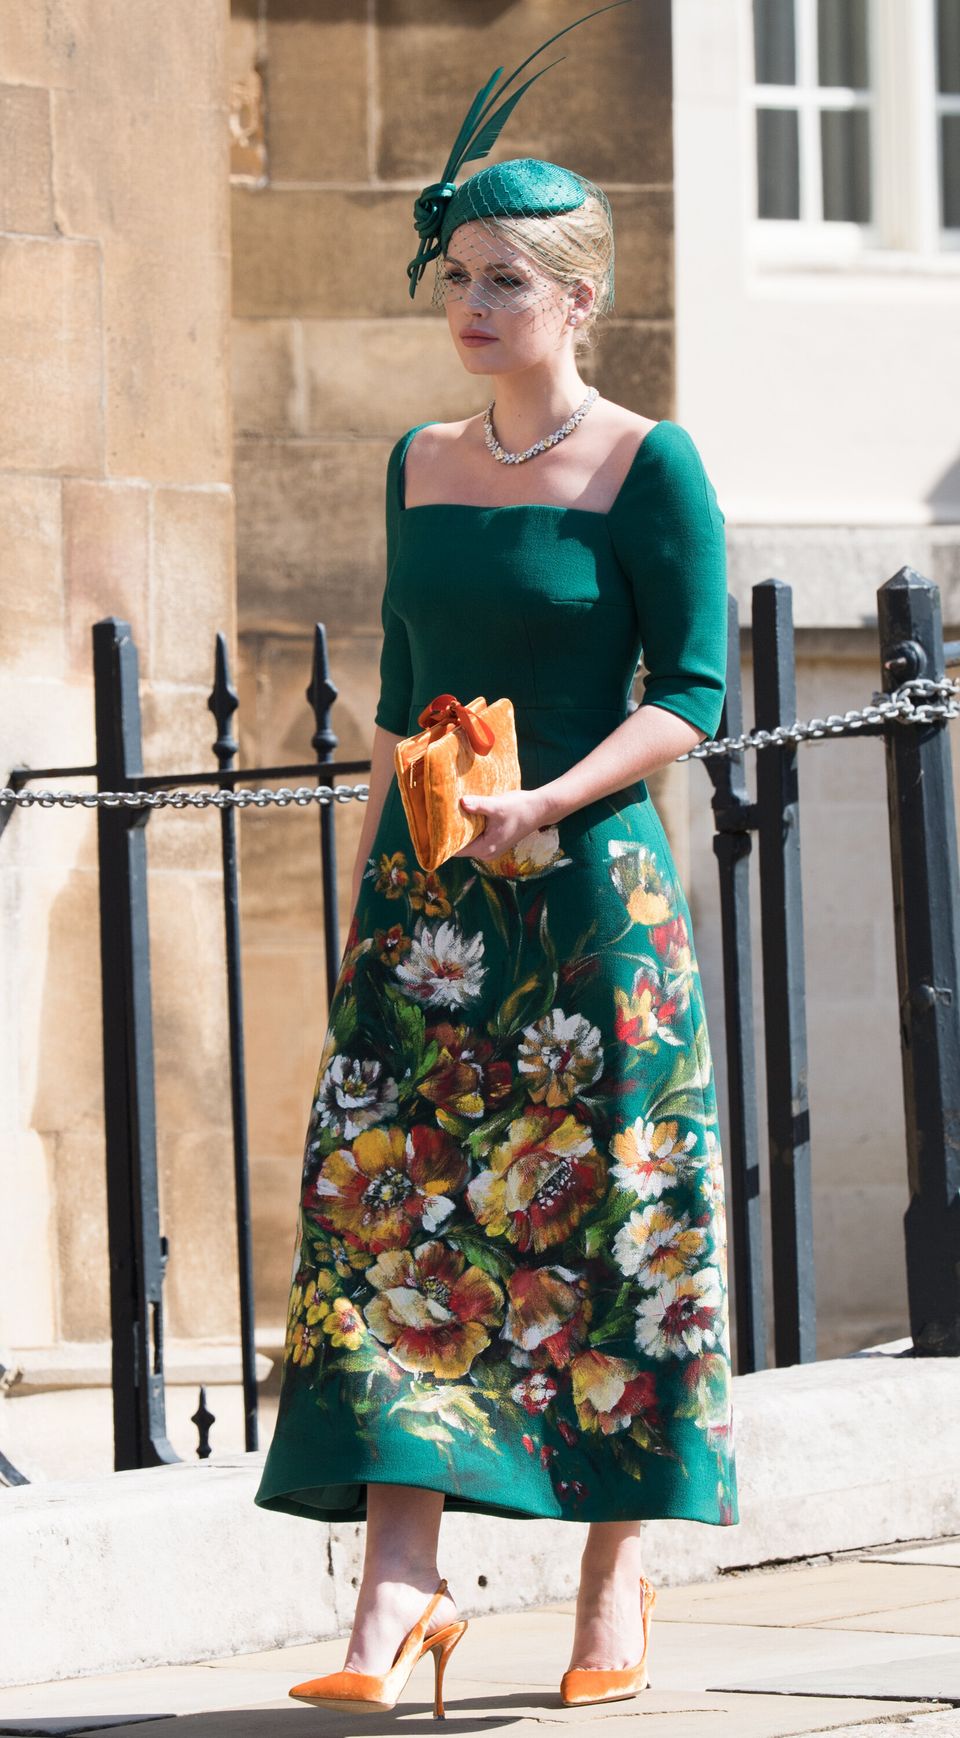 Princess Diana’s Niece Is A Fashionista In Her Own Right